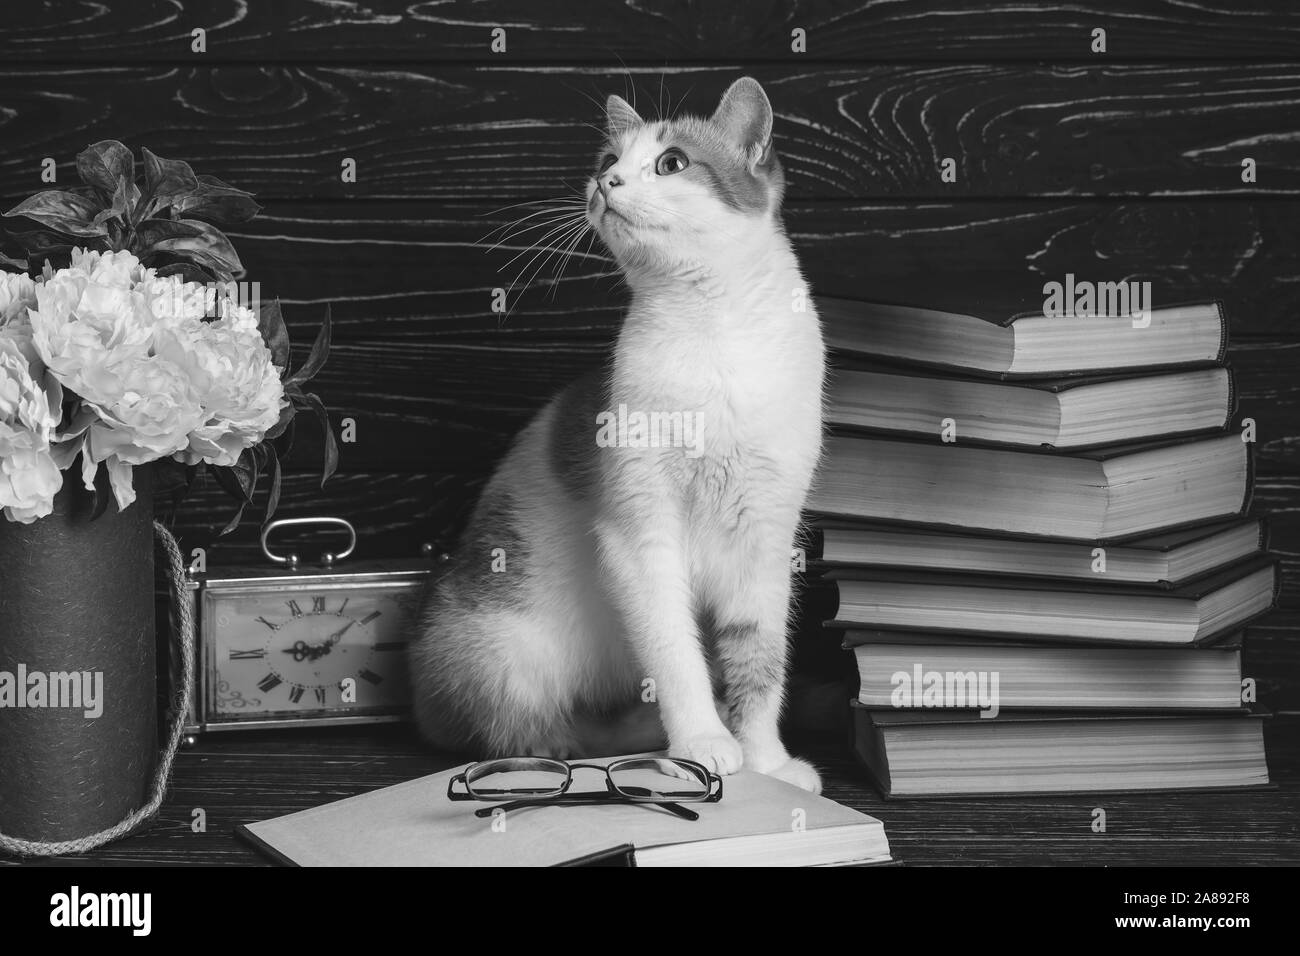 Kitten with fluffy mustache on the table. Educational background. Stock Photo